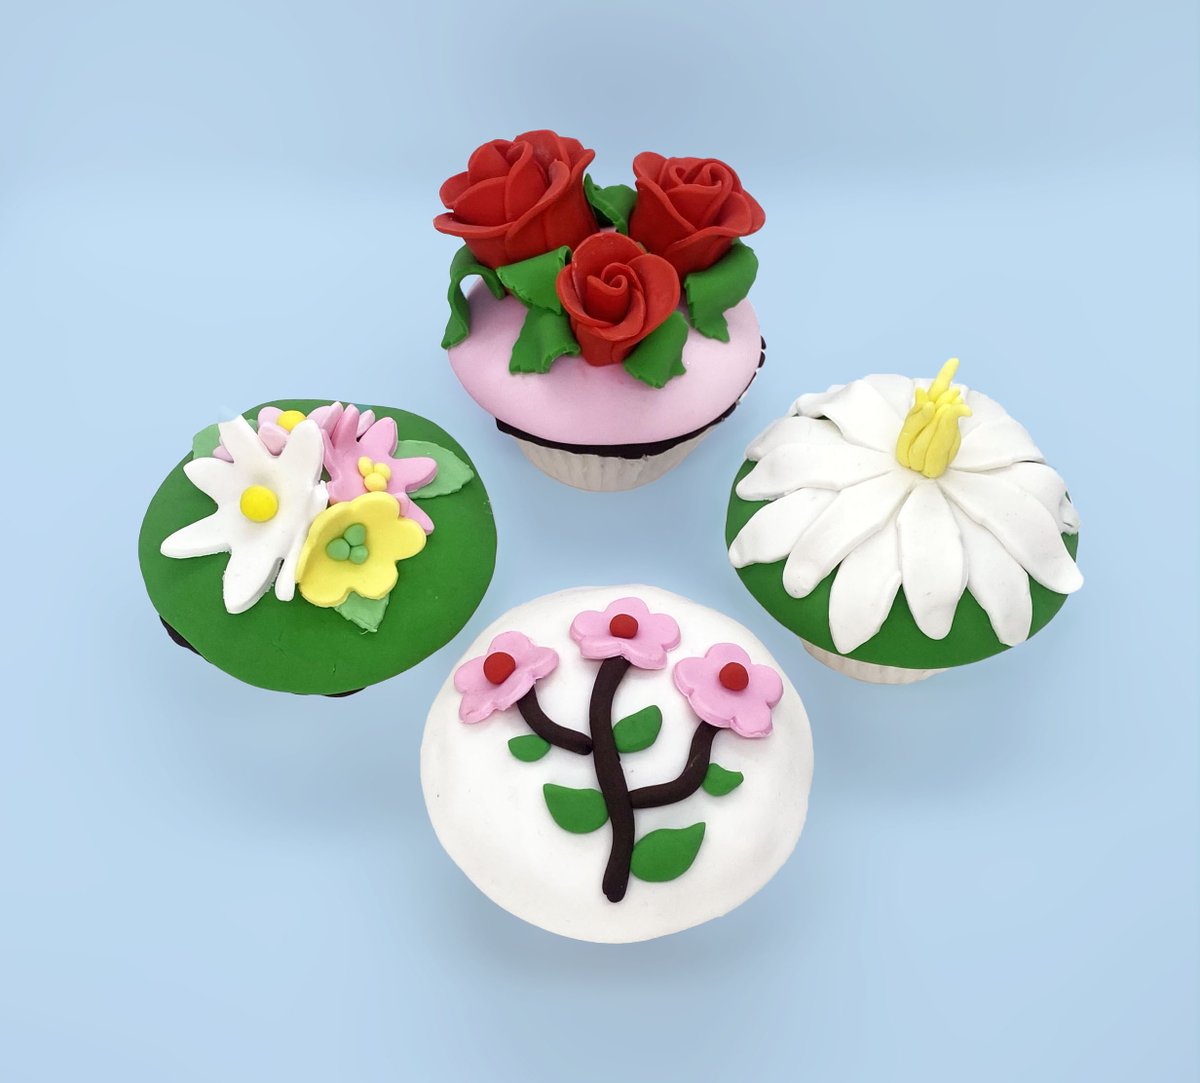 INTERMEDIATE Mother's Day FLOWERS CUPCAKE CLASS - Saturday, May 11th at 11:30 am- 1:00 pm

charmcitycakes.com/baltimore-clas…

#charmcitycakes #ccc #customcakes #cake #mothersday #mom #flowers #classes #cakeclass #baltimore #bmore